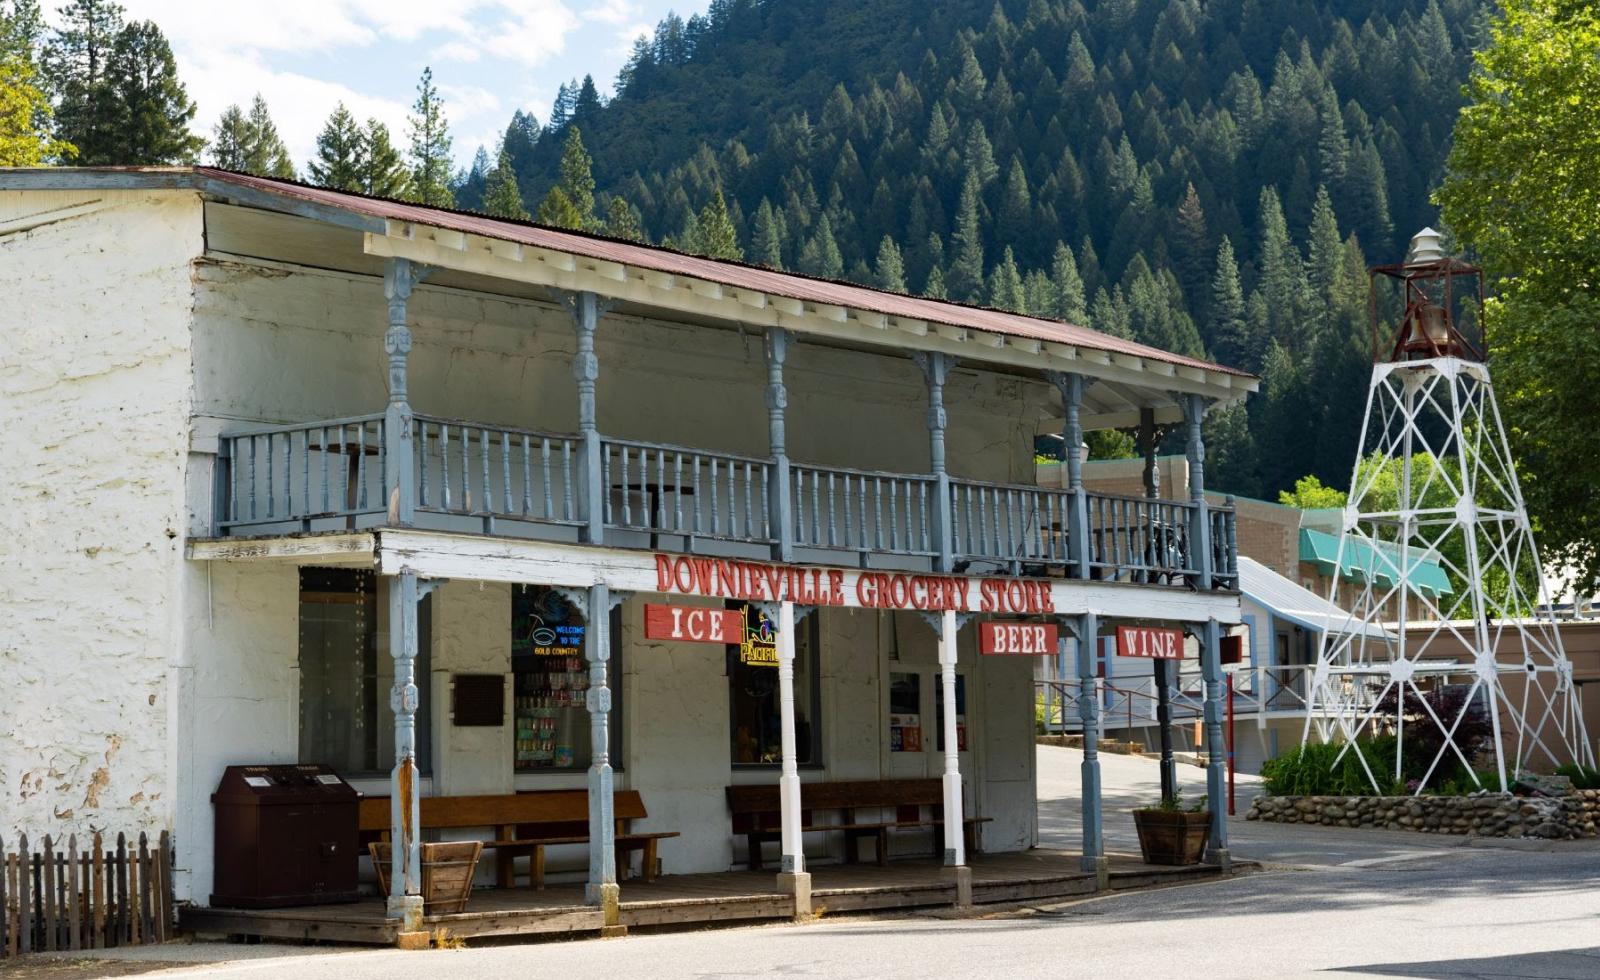 Downieville Grocery store